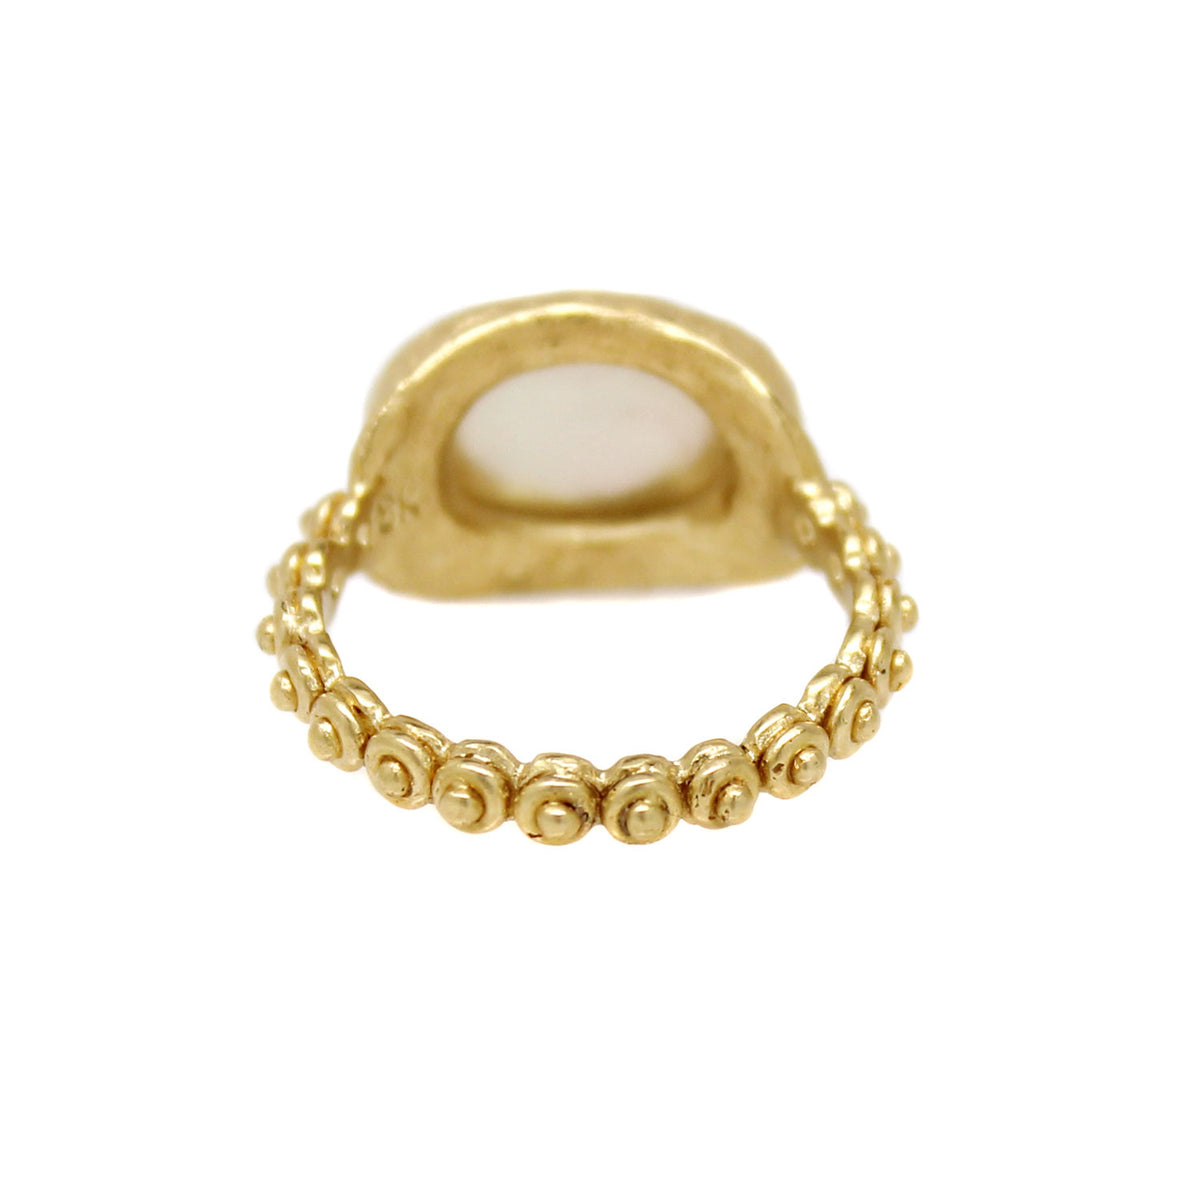 One-of-a-Kind Oval Mabè Pearl Ring